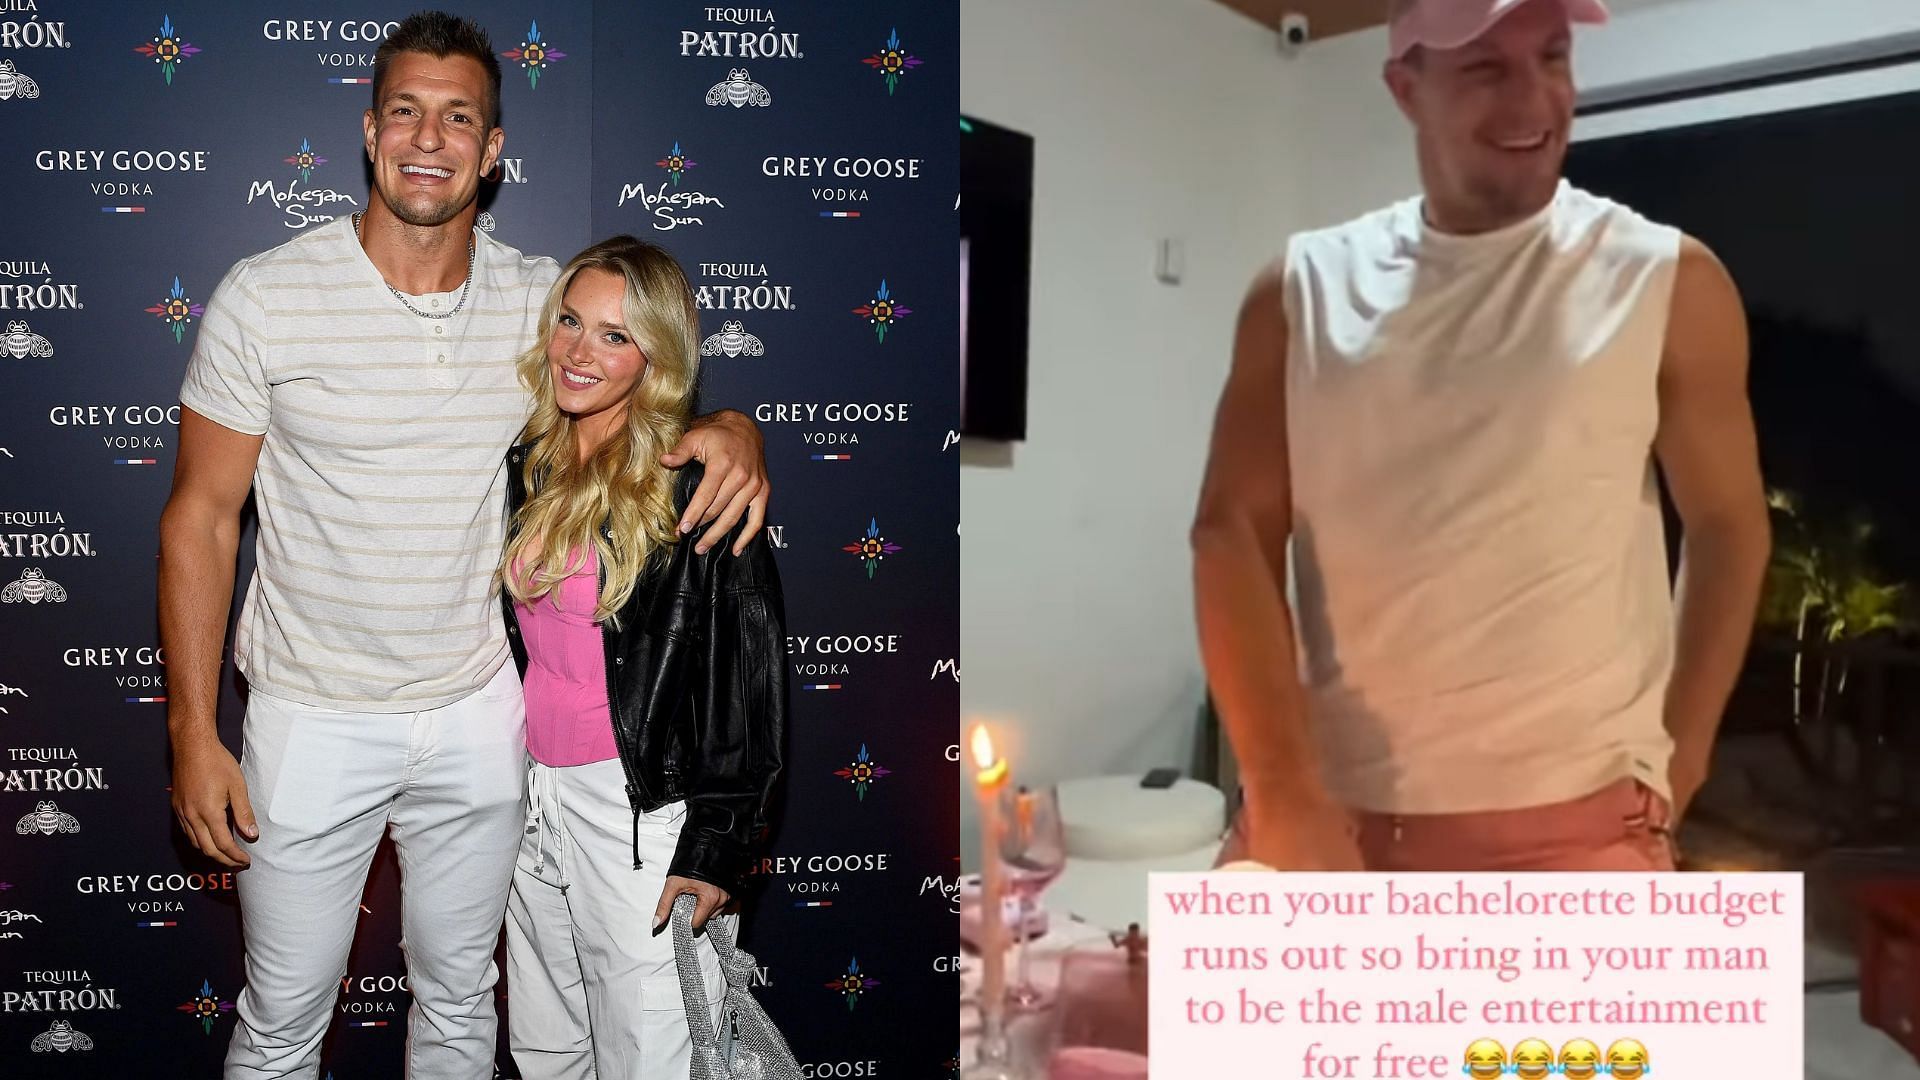 Rob Gronk dances while wearing pink